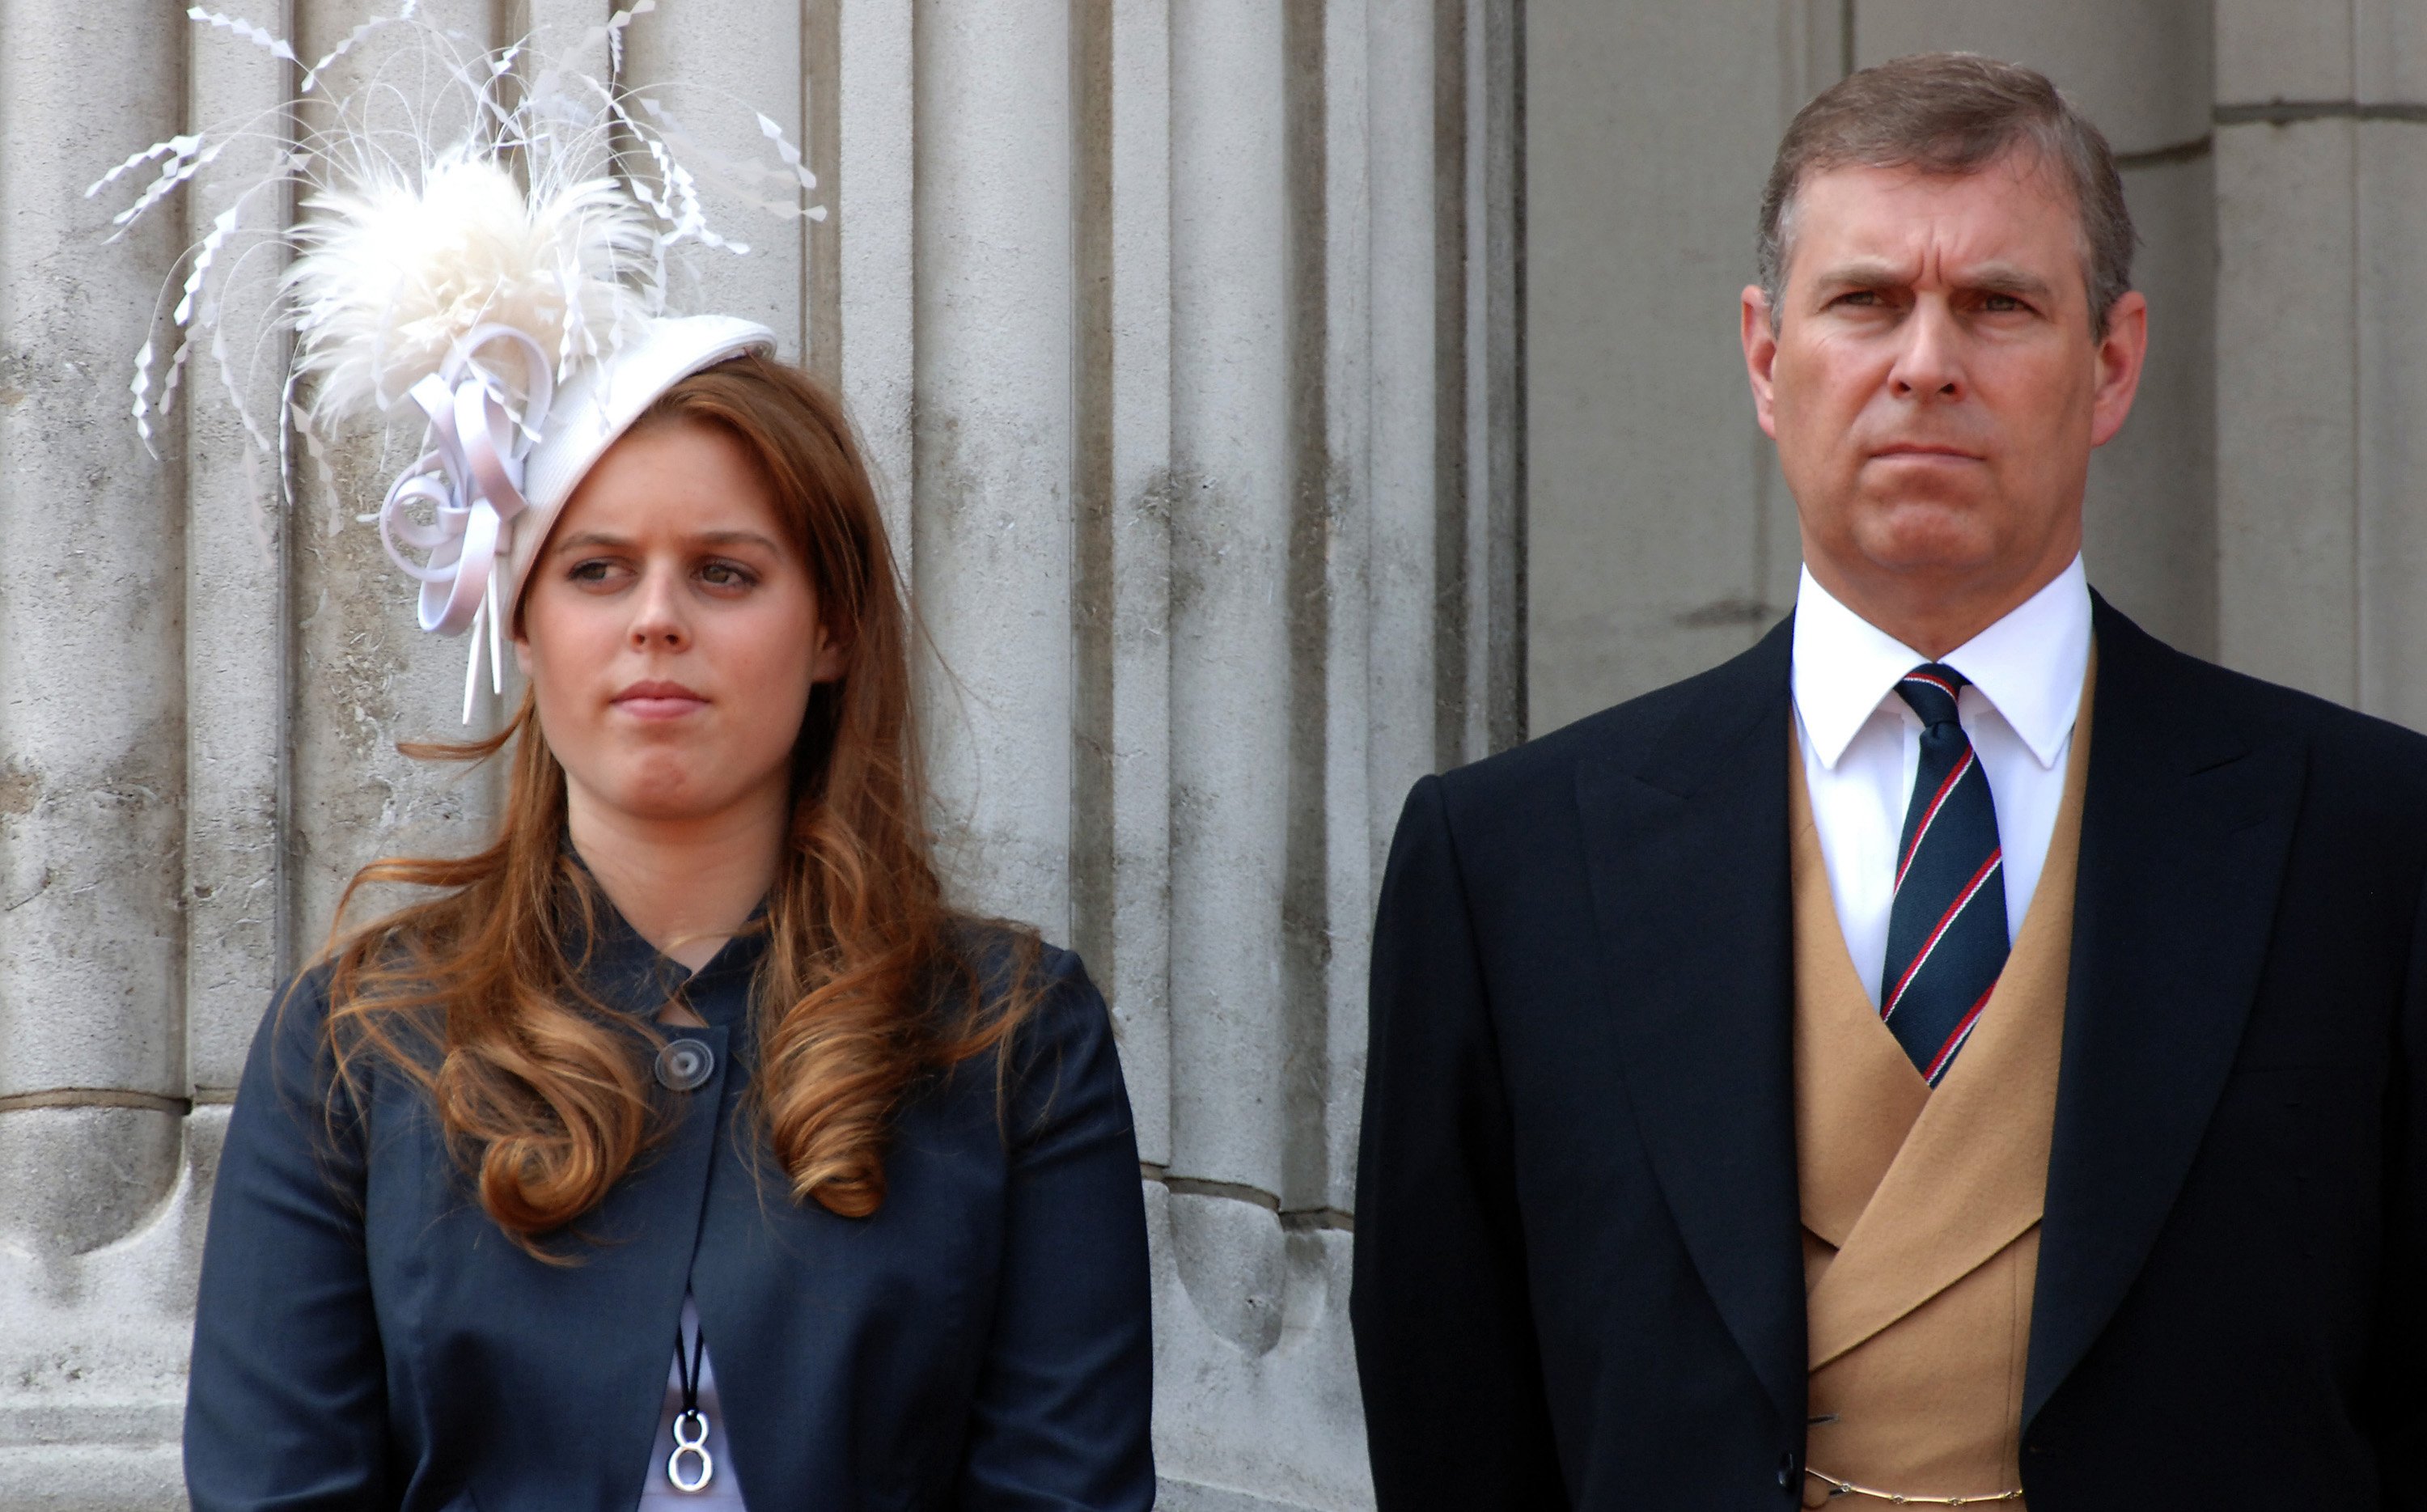 Prince Andrew, Duke of York, pictured with his daughter, Princess Beatrice, on the balcony of Buckingham Palace on June 17, 2006. / Source: Getty Images